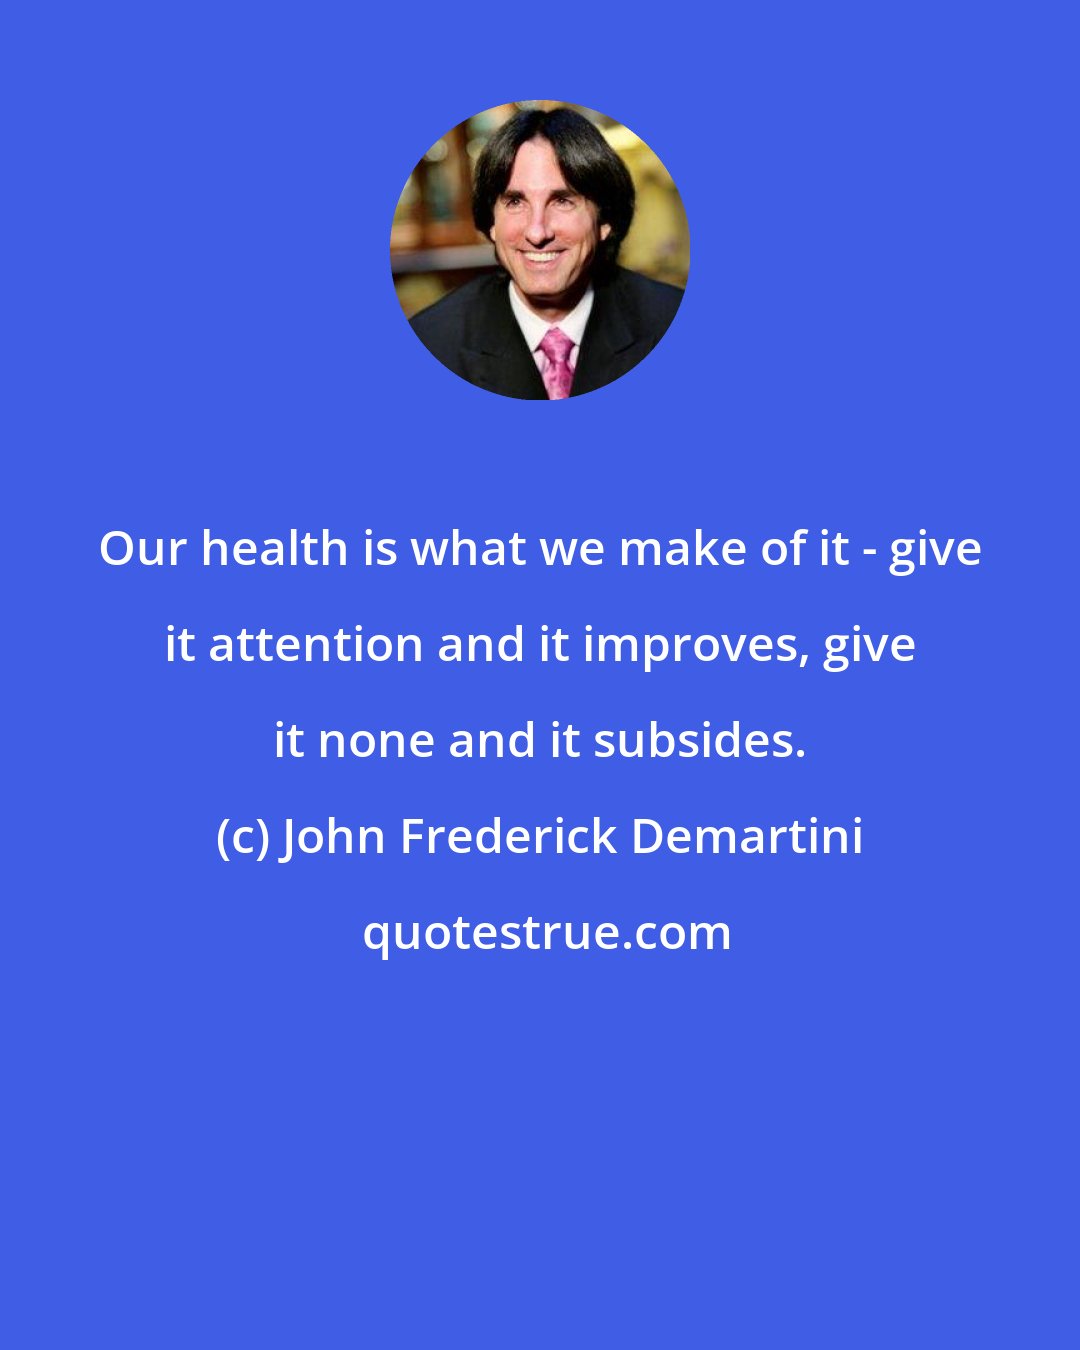 John Frederick Demartini: Our health is what we make of it - give it attention and it improves, give it none and it subsides.